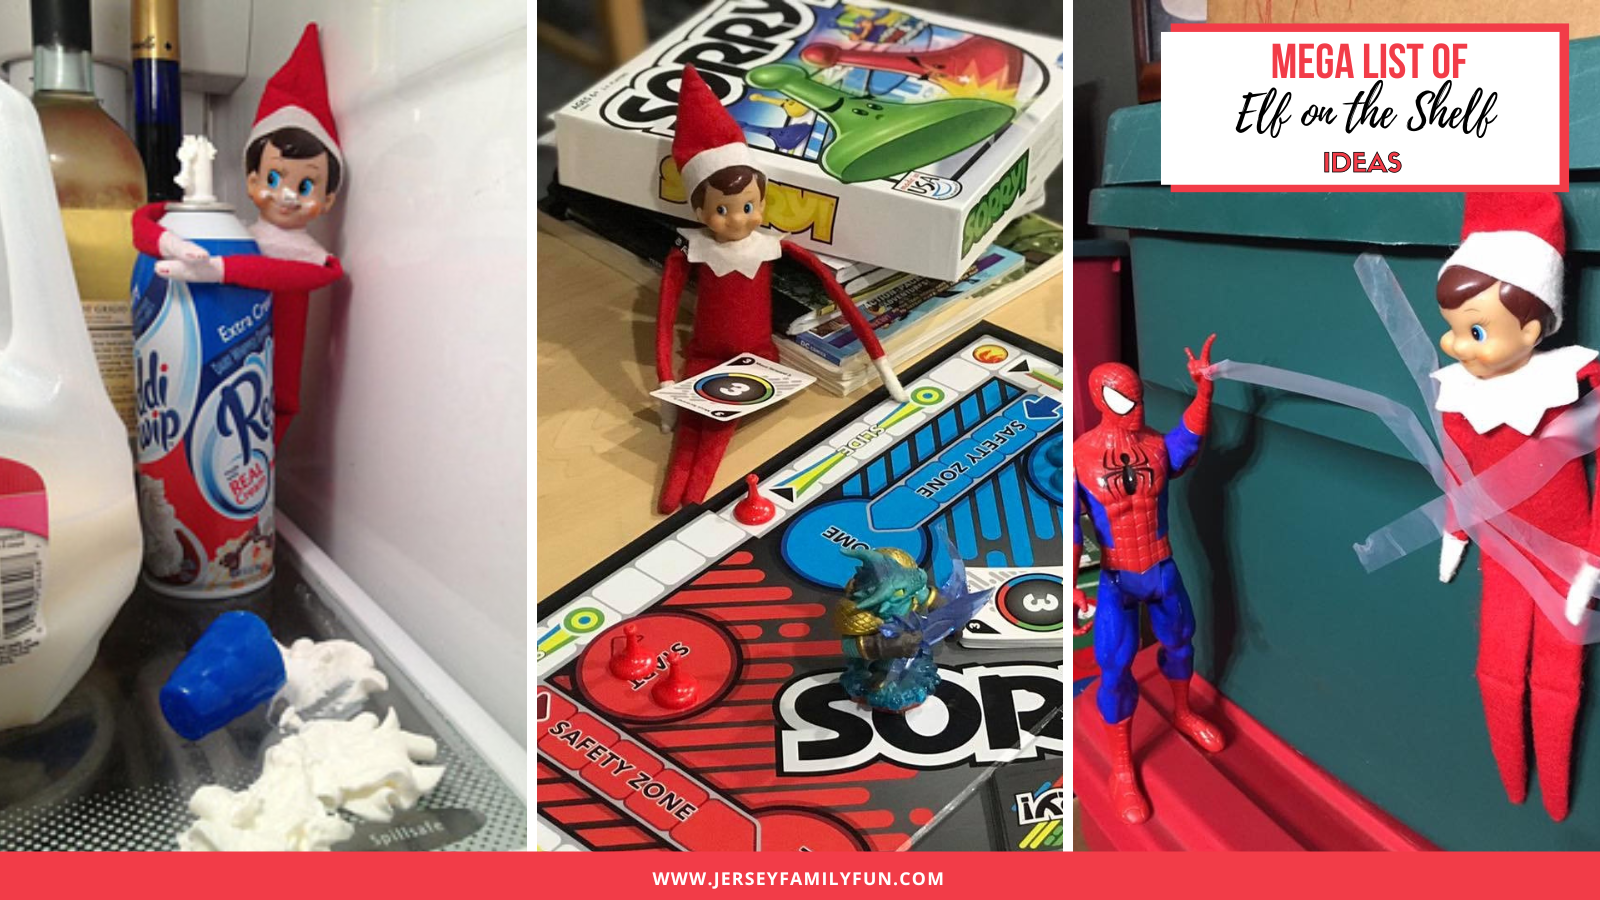 Collage of Elf on the Shelf ideas